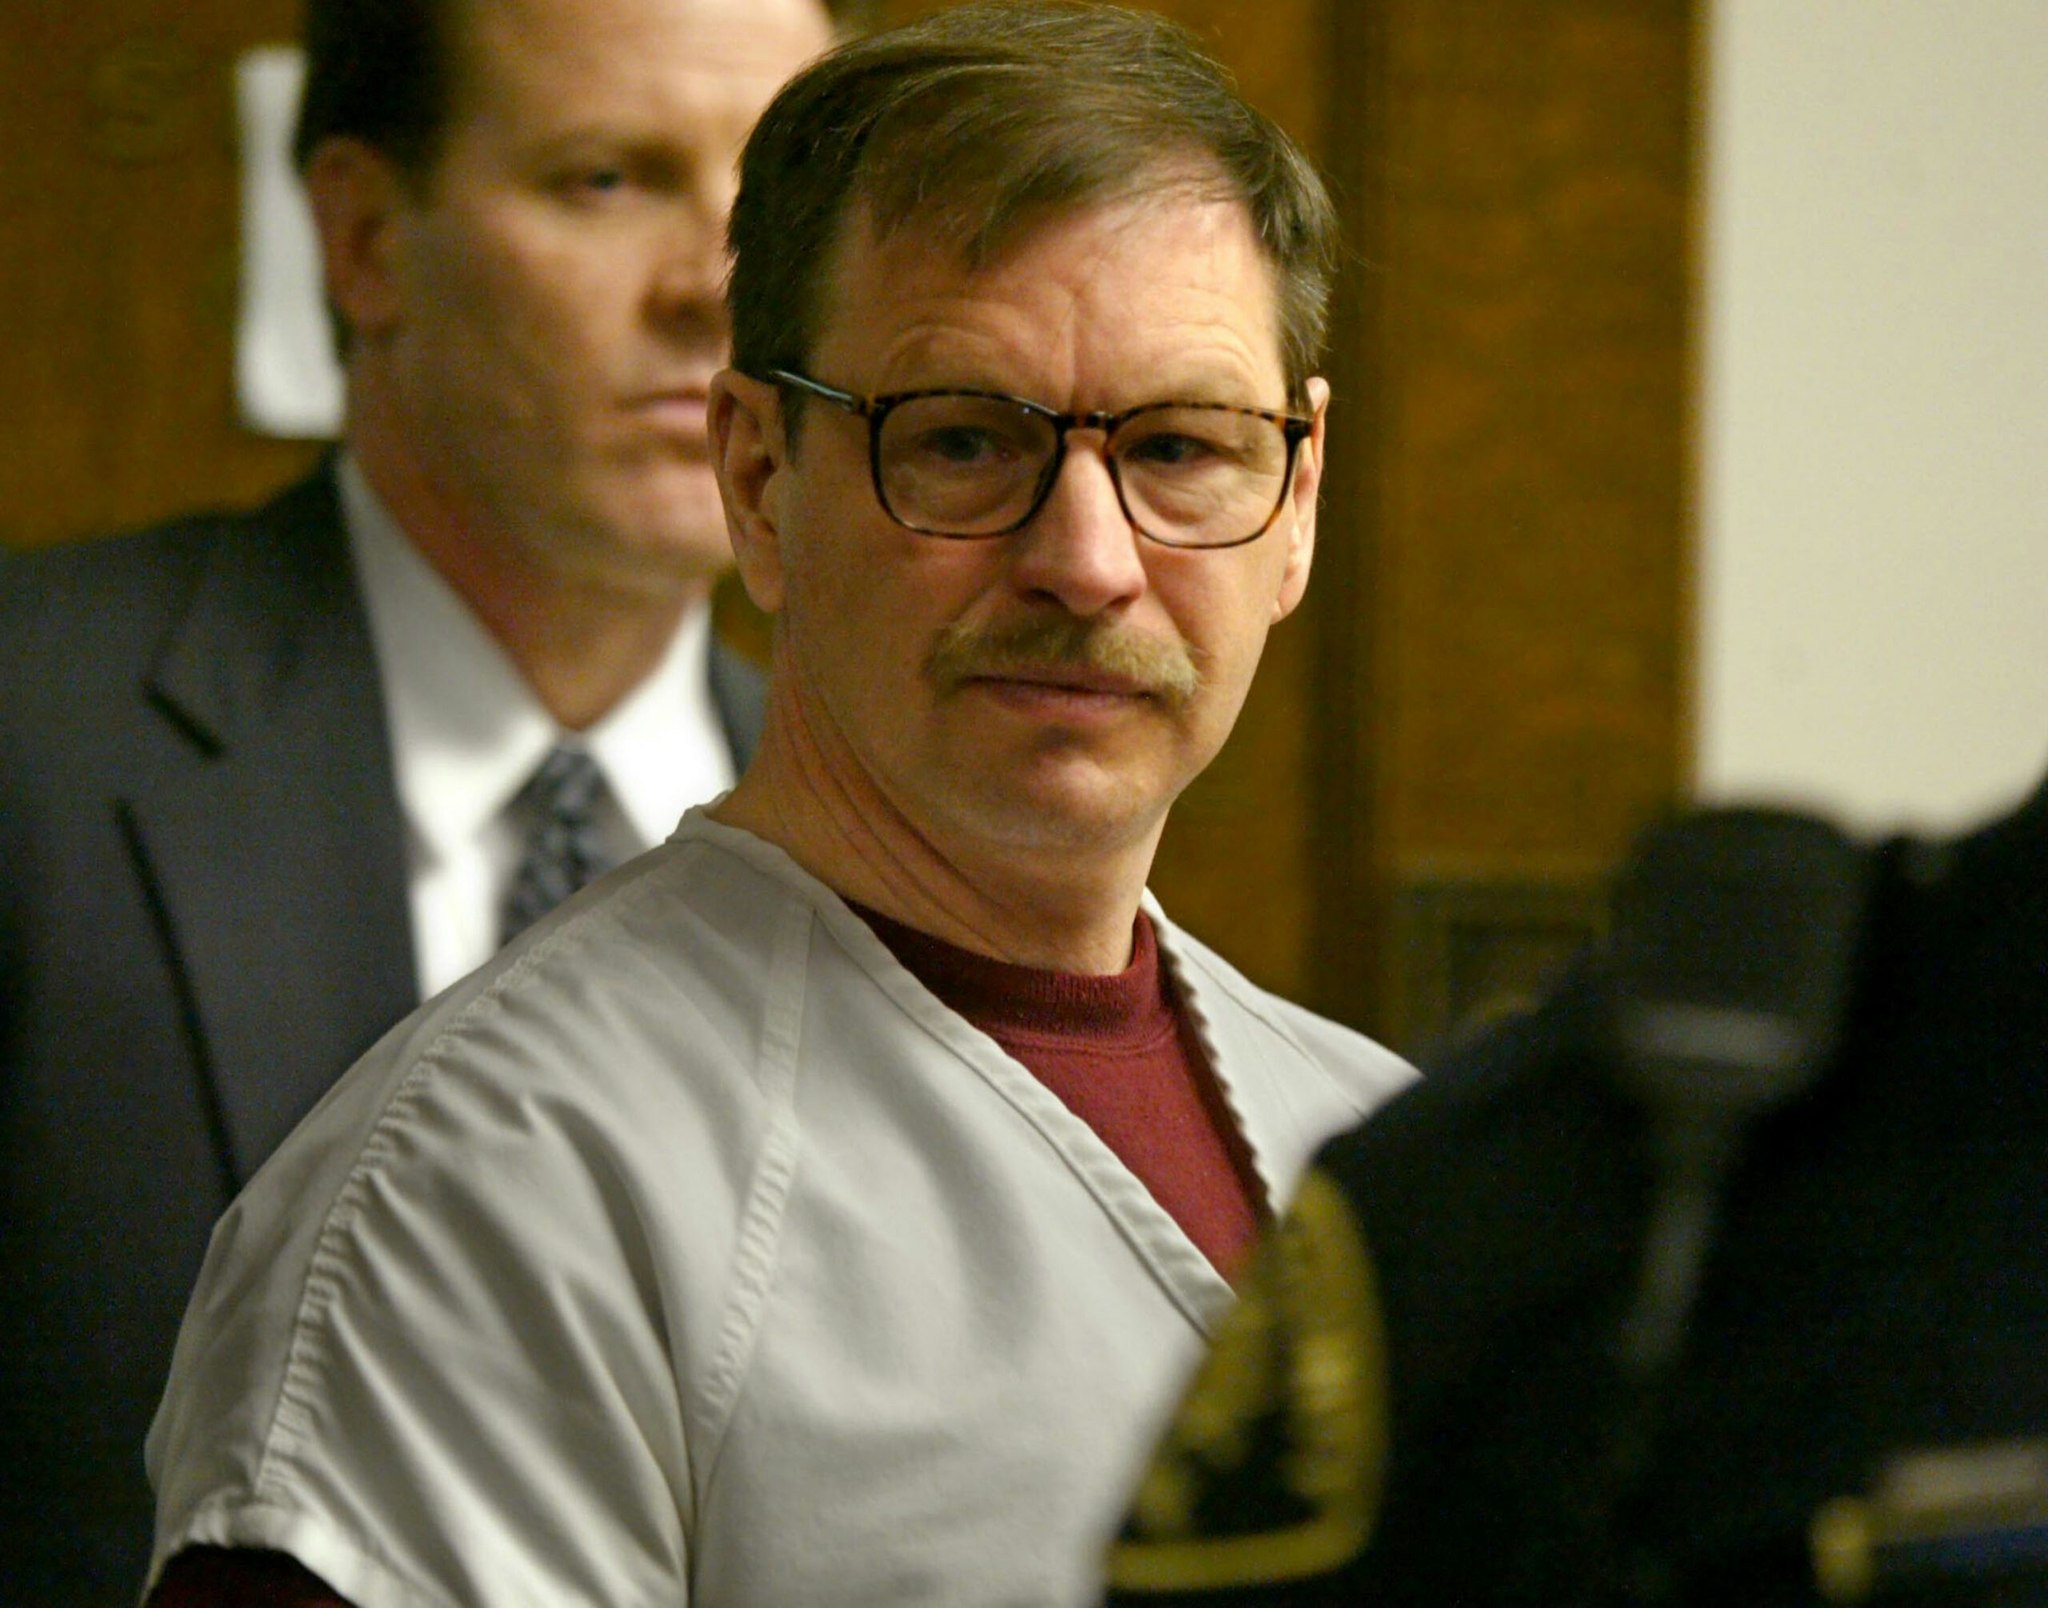 Gary Ridgway prepares to leave the courtroom where he was sentenced in King County Washington Superior Court December 18, 2003 in Seattle, Washington.